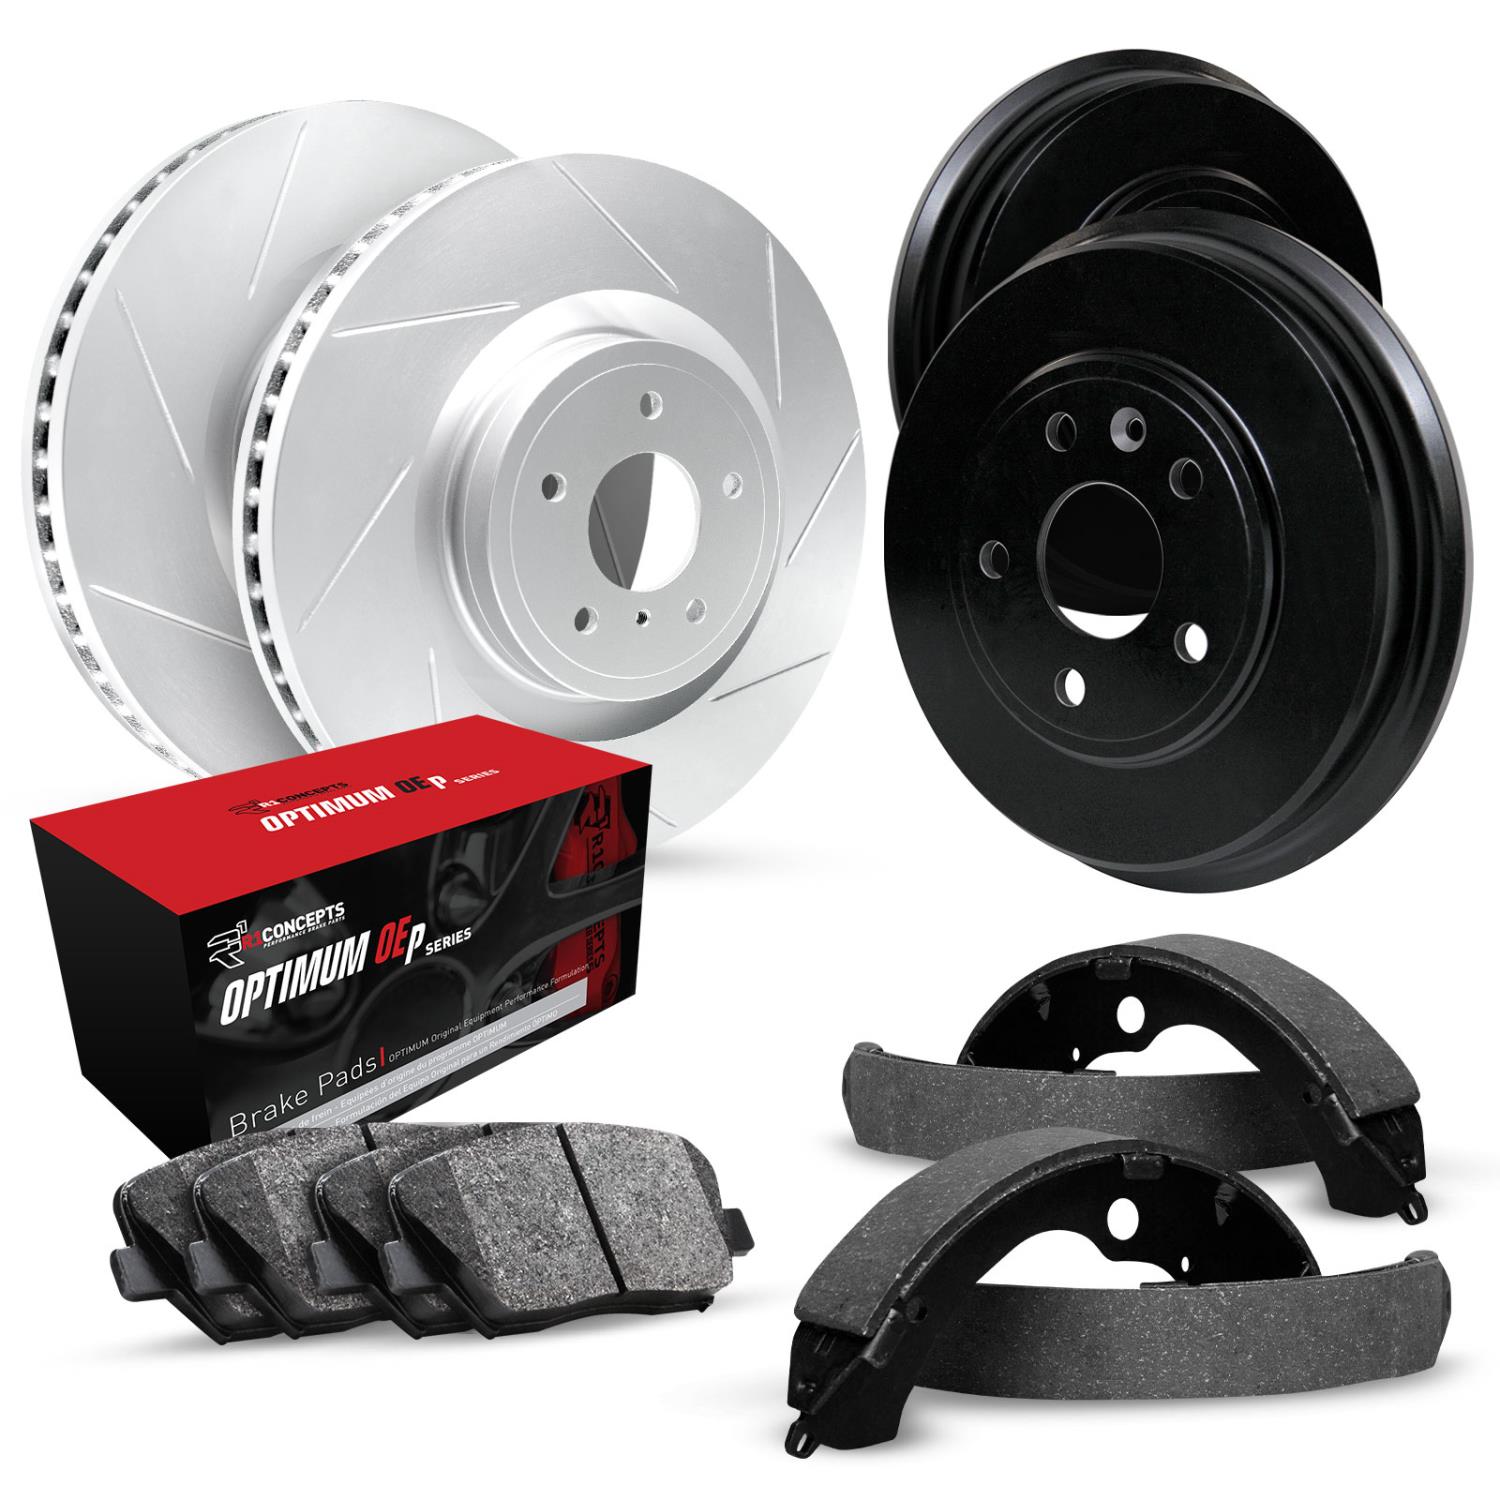 GEO-Carbon Slotted Brake Rotor & Drum Set w/Optimum OE Pads & Shoes, 2016-2020 Fits Multiple Makes/Models